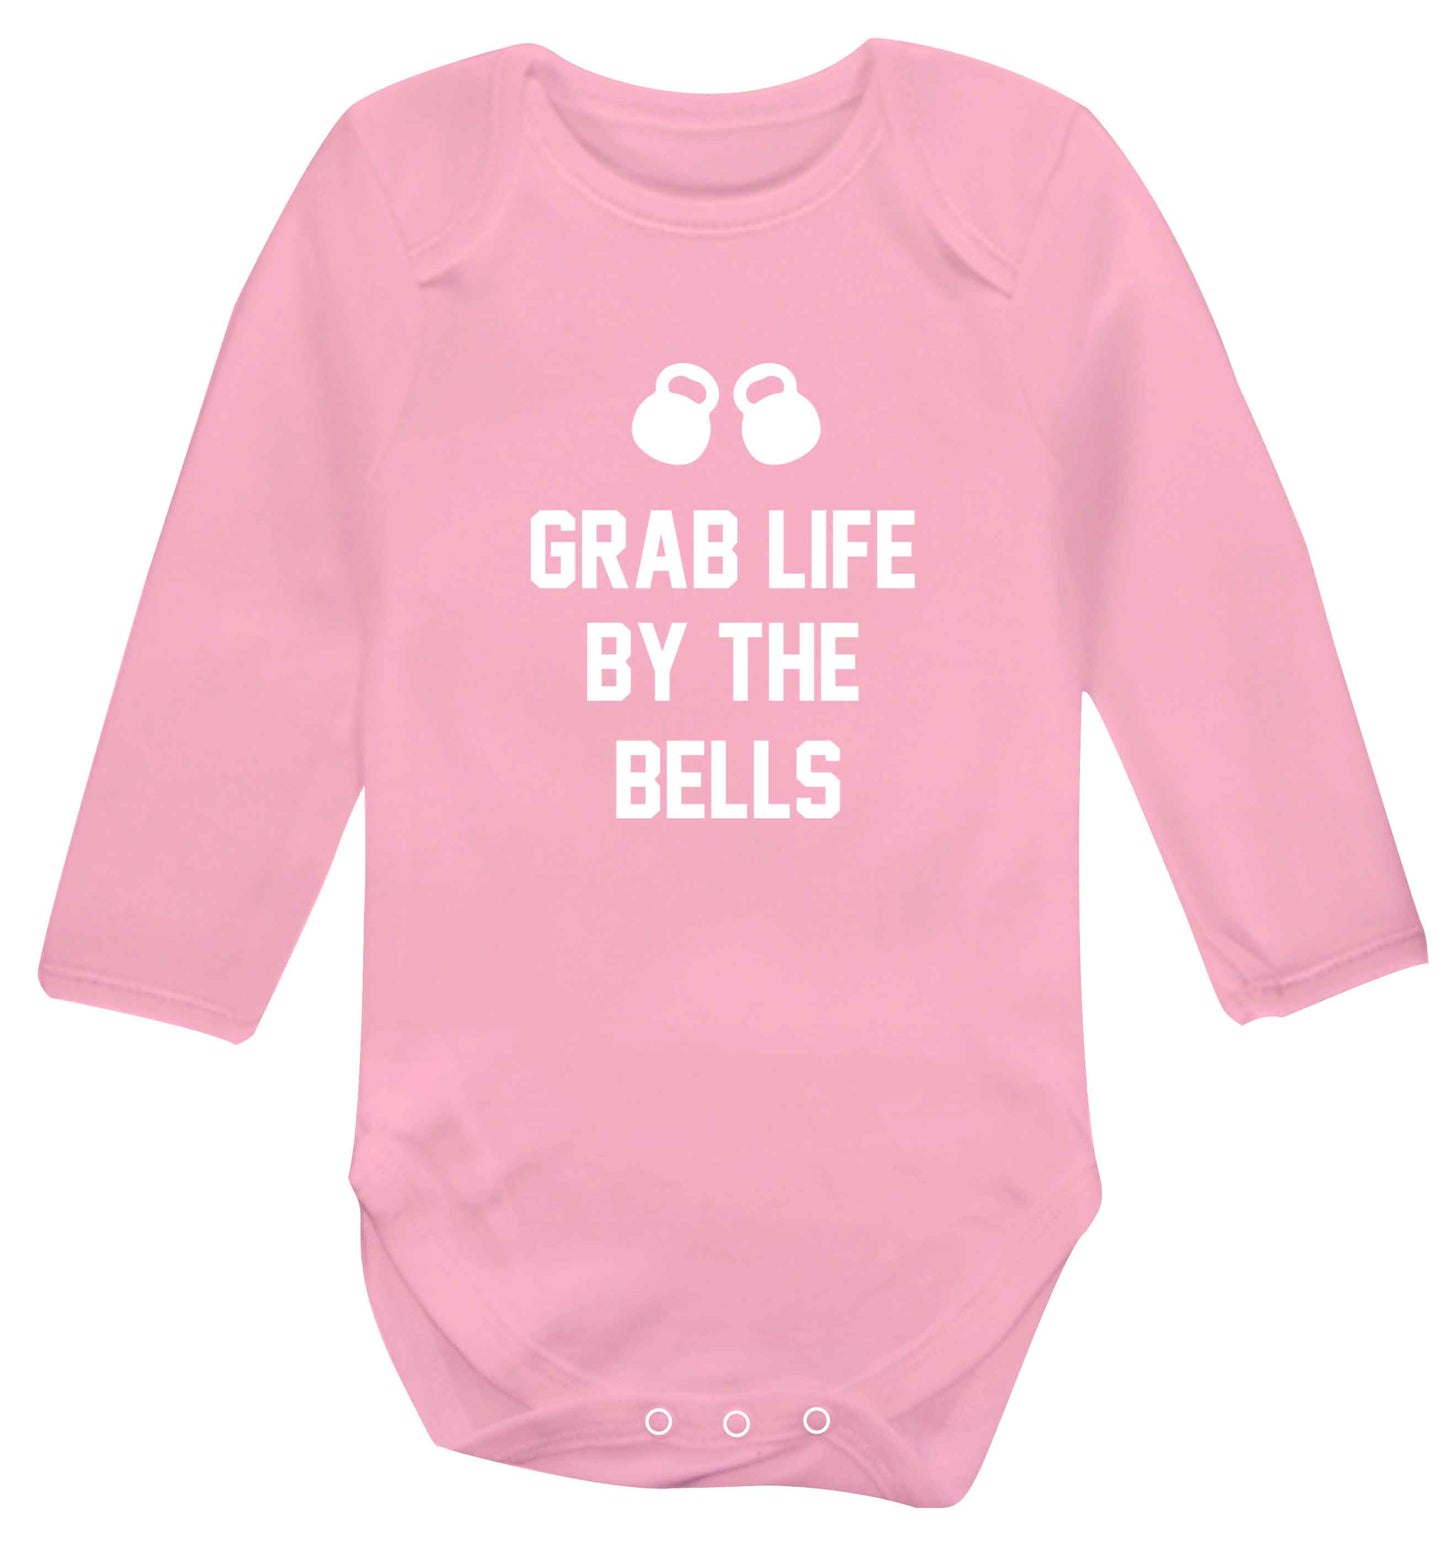 Grab life by the bells baby vest long sleeved pale pink 6-12 months